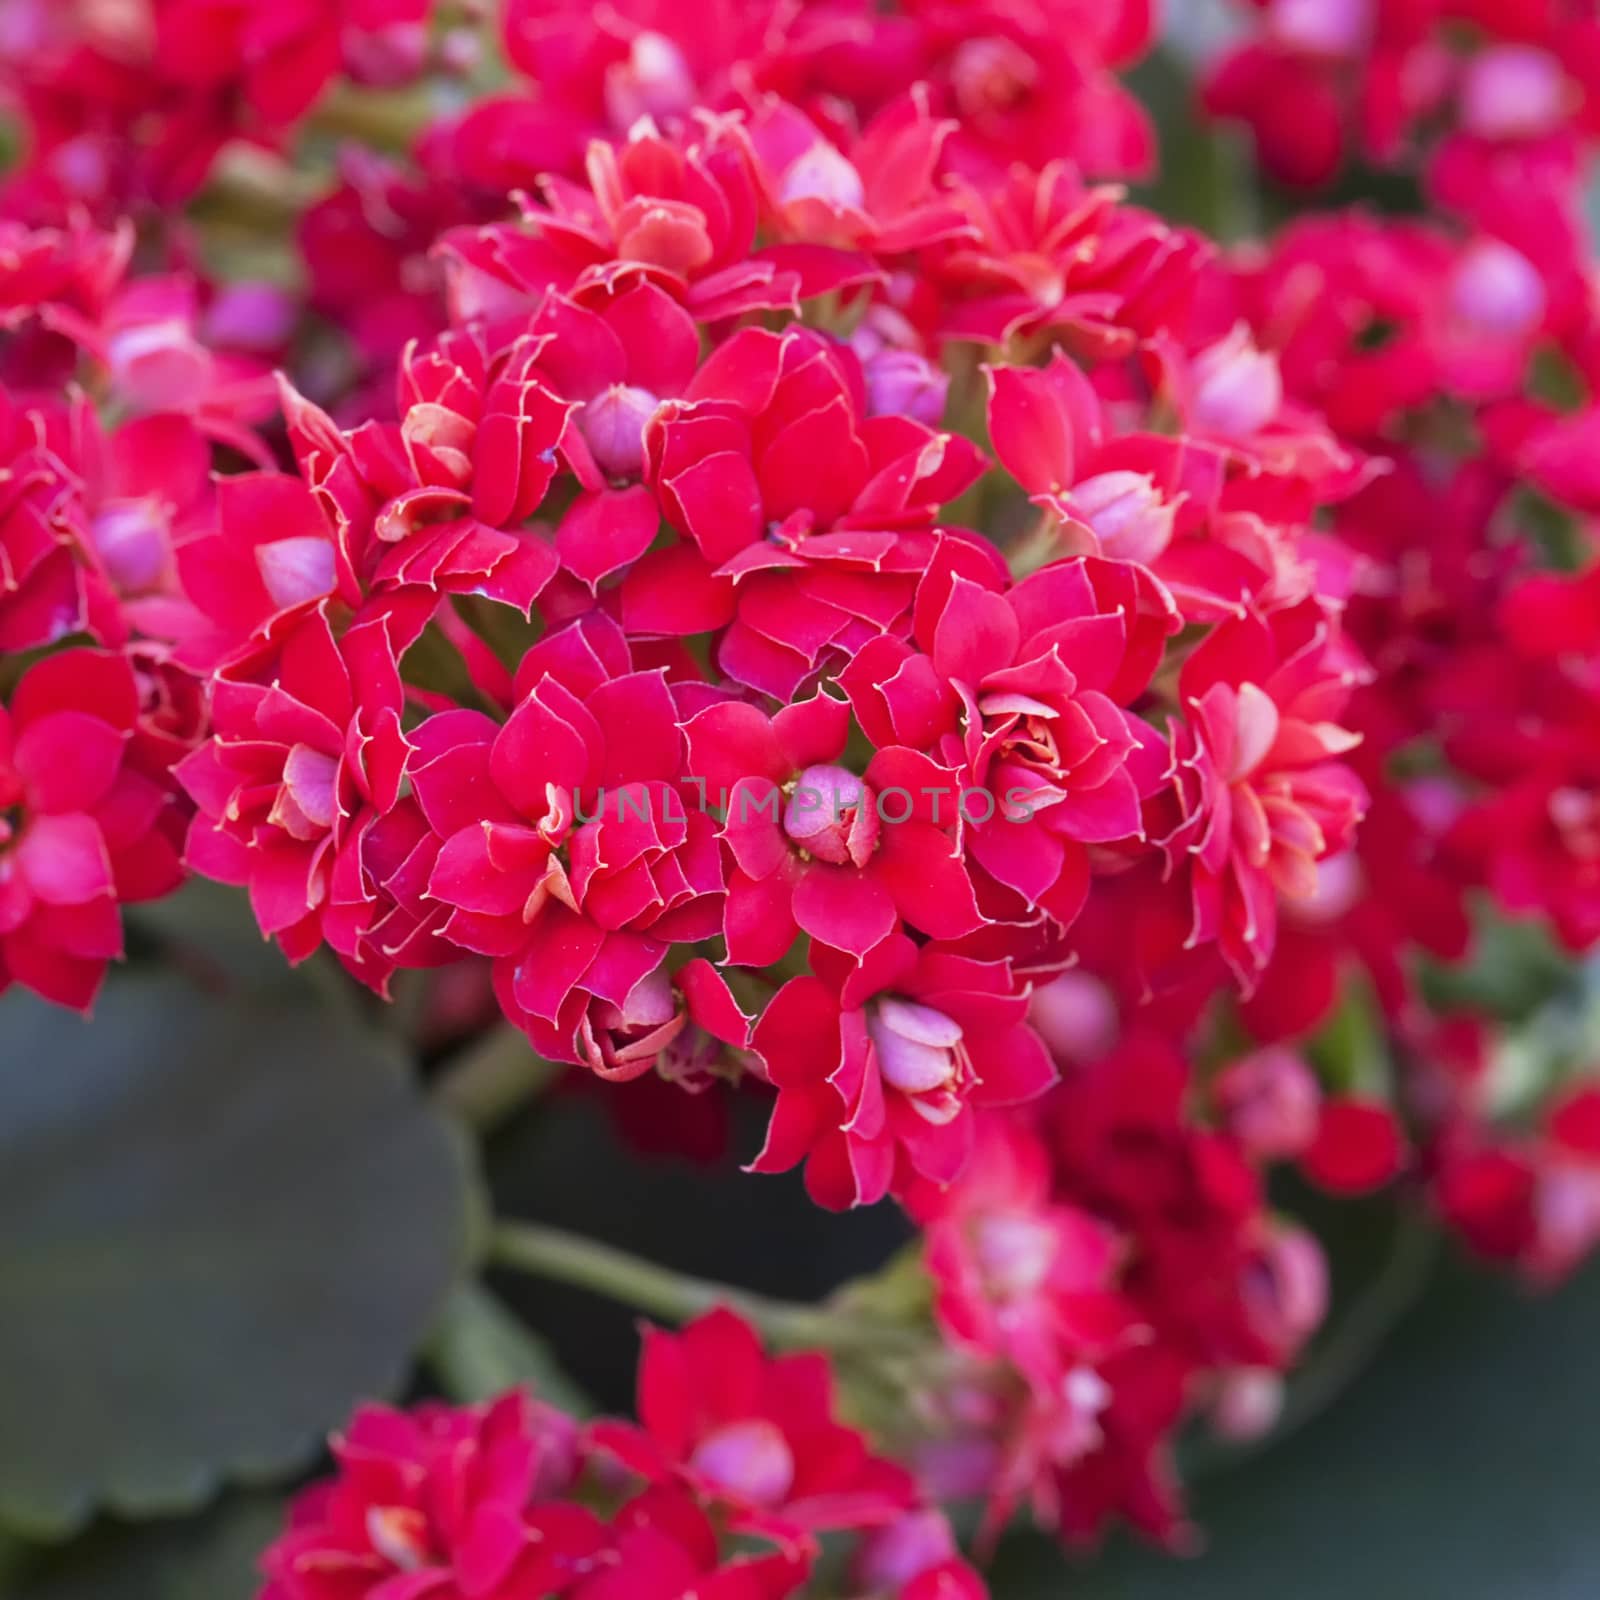 Red flowers in close up, square image